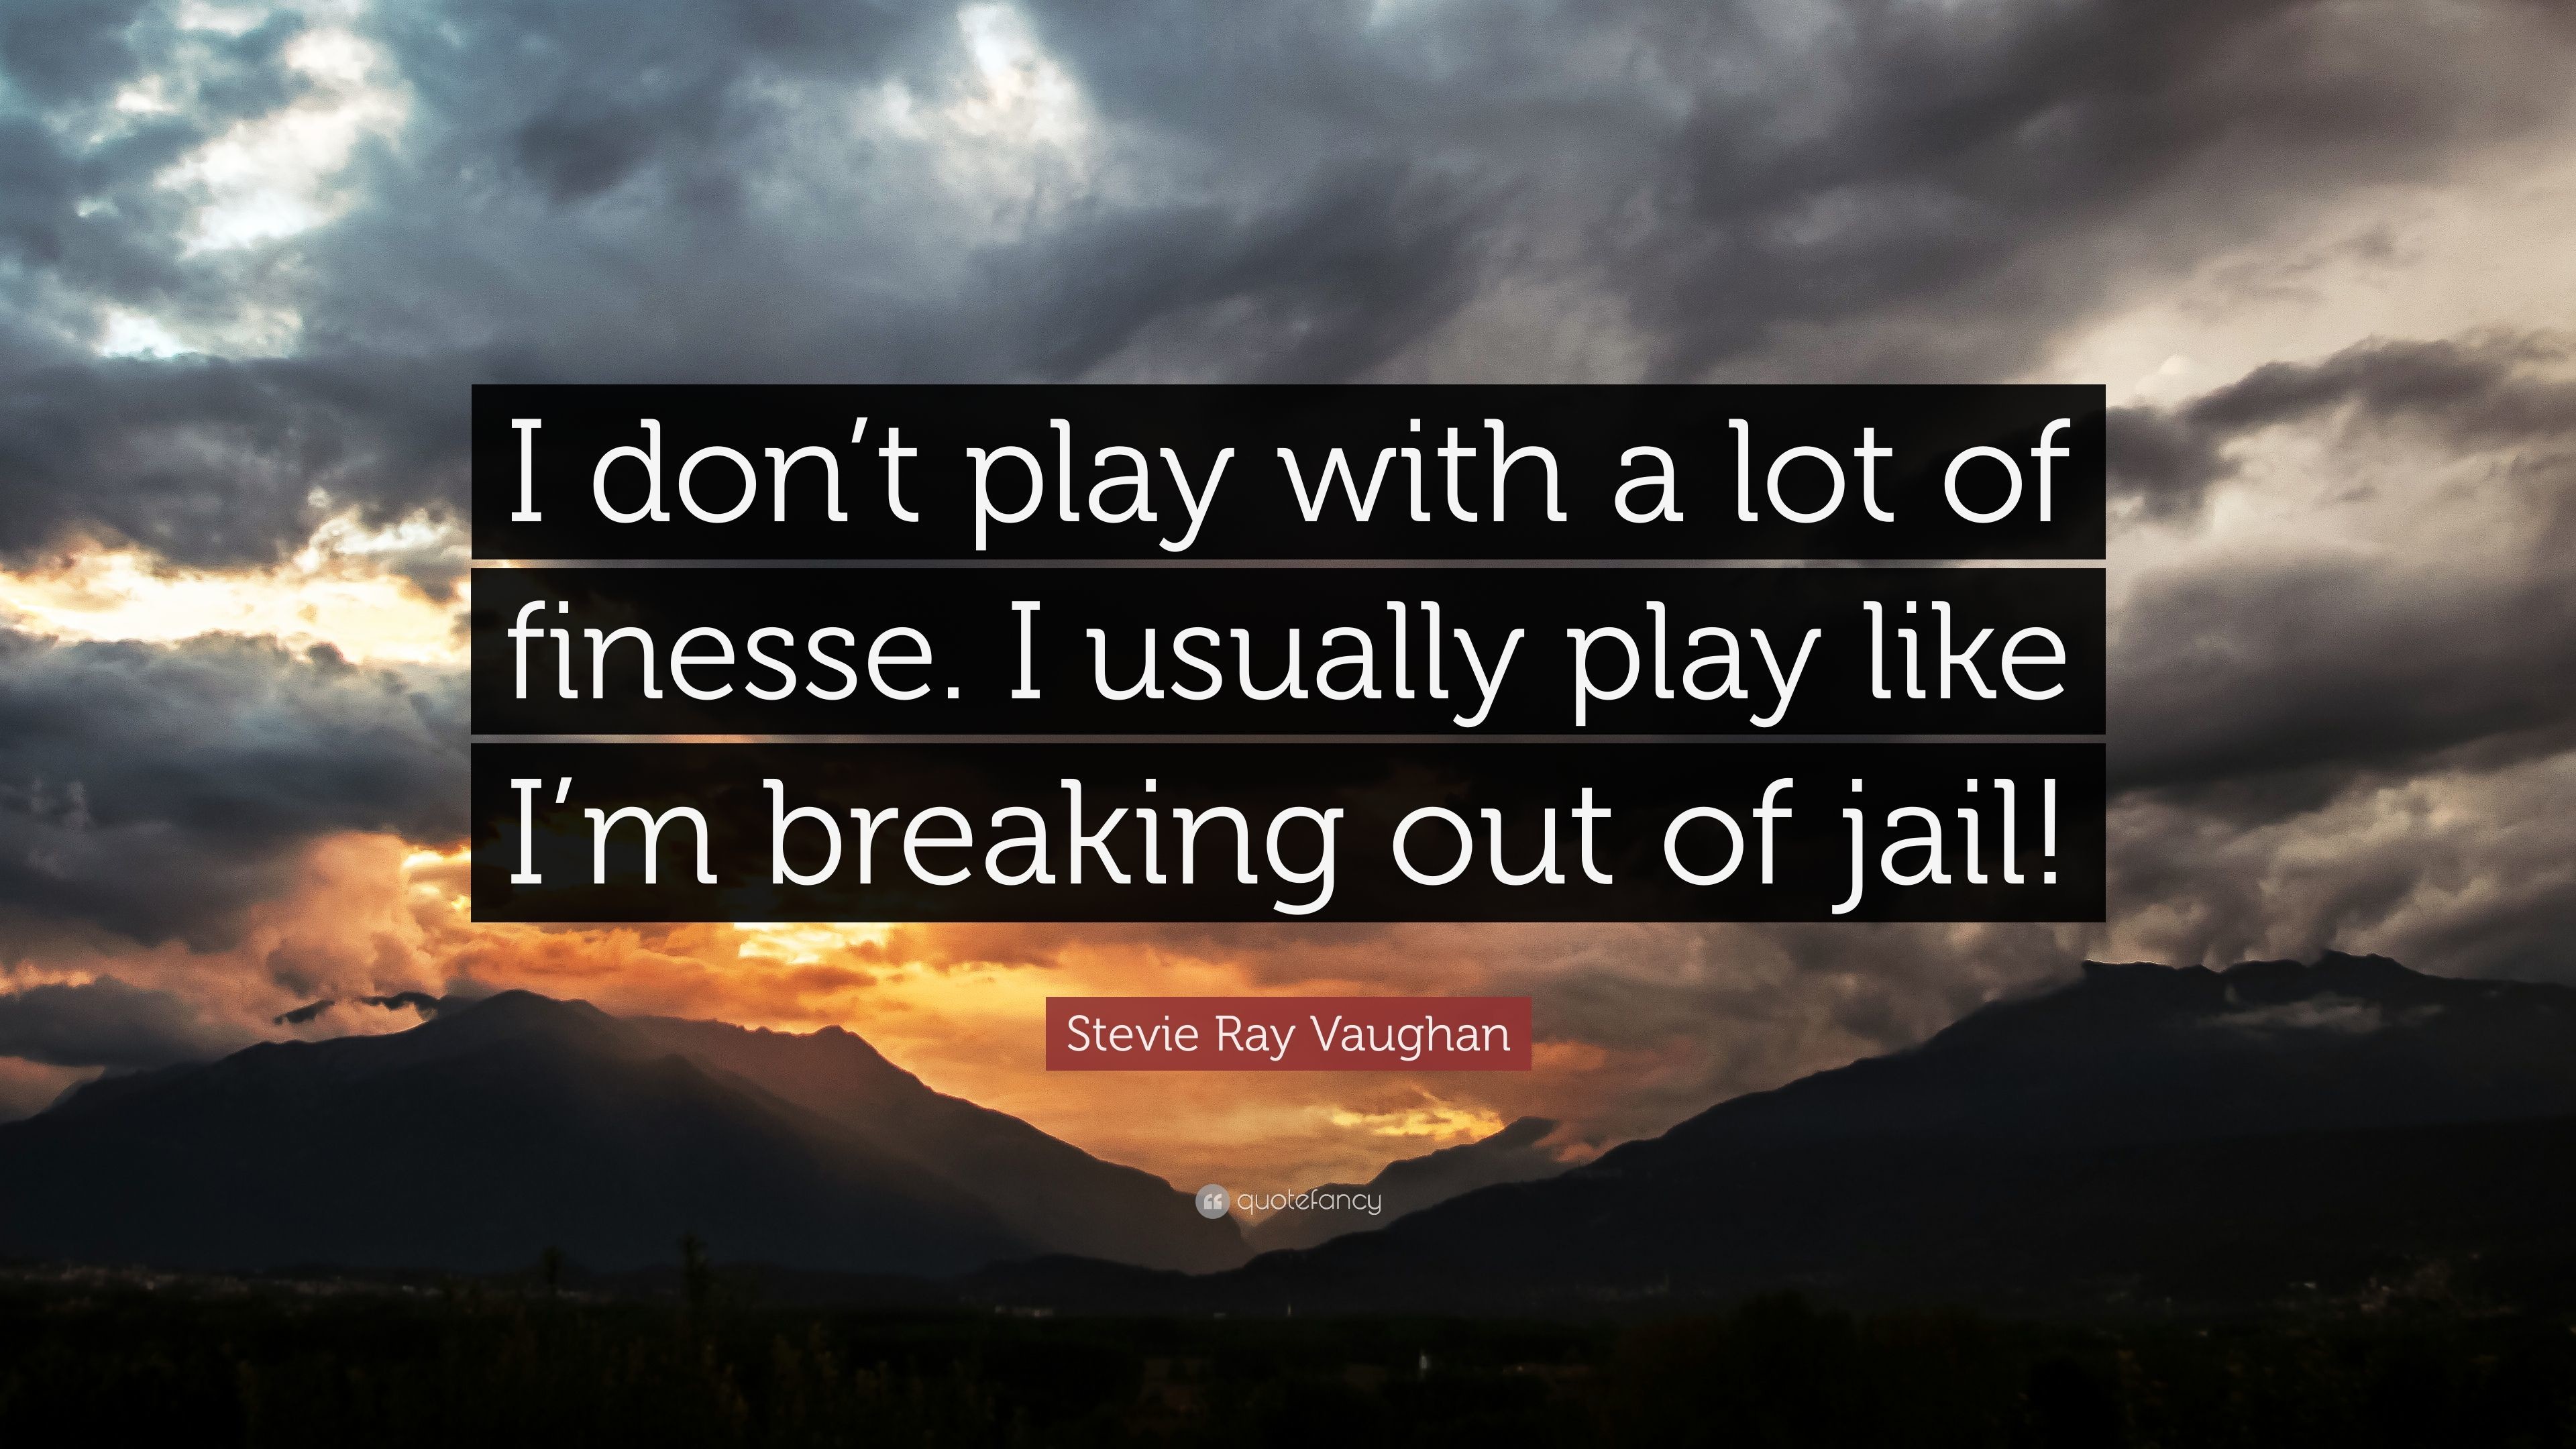 3840x2160 Stevie Ray Vaughan Quote: “I don't play with a lot of finesse